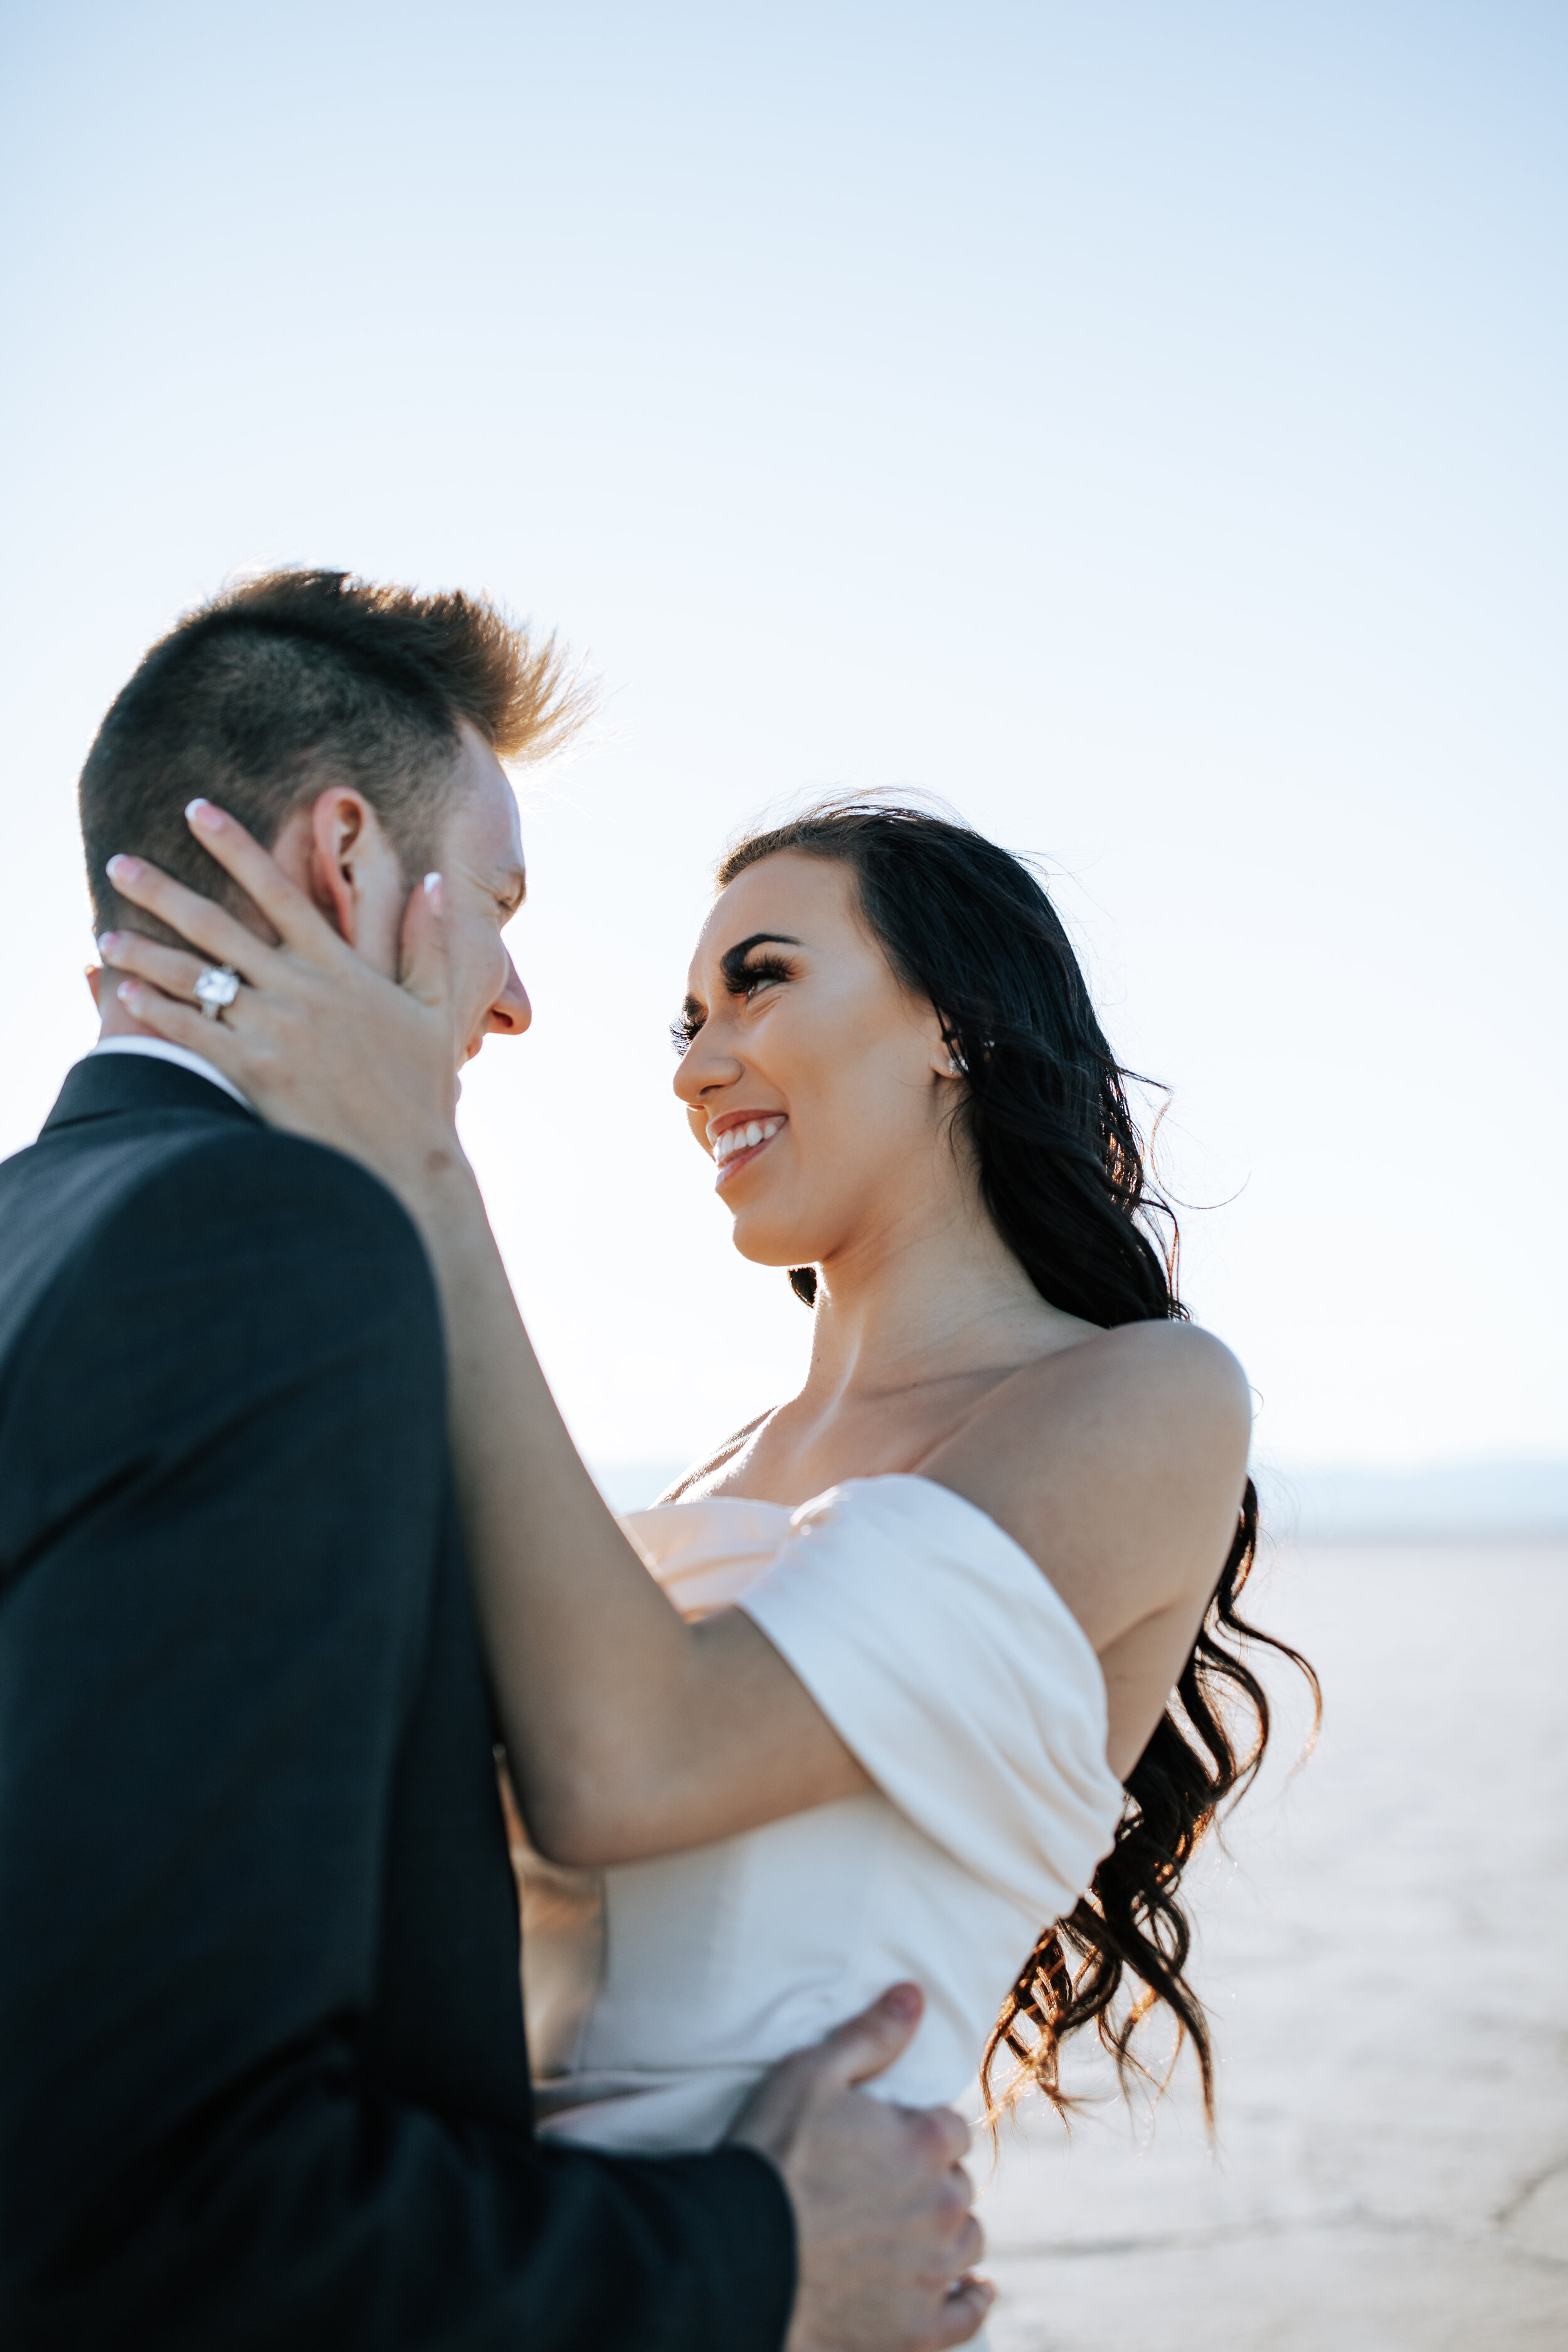  Couple on the Utah Salt Flats with women holding man's face smiling at him captured by Emily Jenkins Photography. Man and wife vow renewal photo couple goals vow renewal style vow poses vow renewal photography wedding redo celebrate anniversary salt